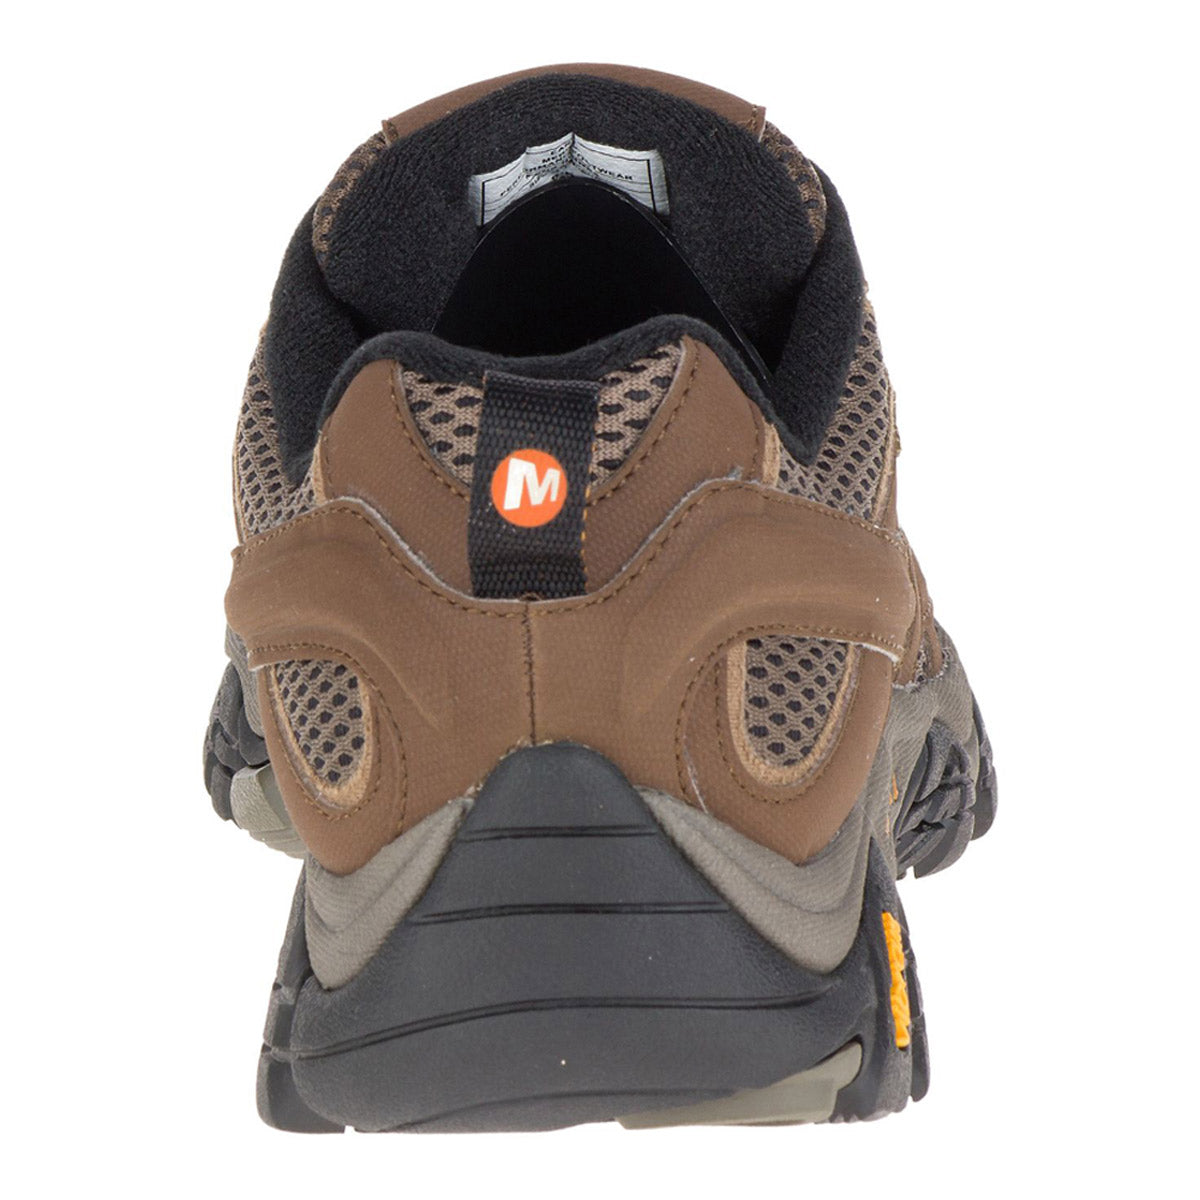 Rear view of a brown and black Merrell Moab 2 Waterproof hiking shoe with a mesh design and a visible logo on the pull tab.